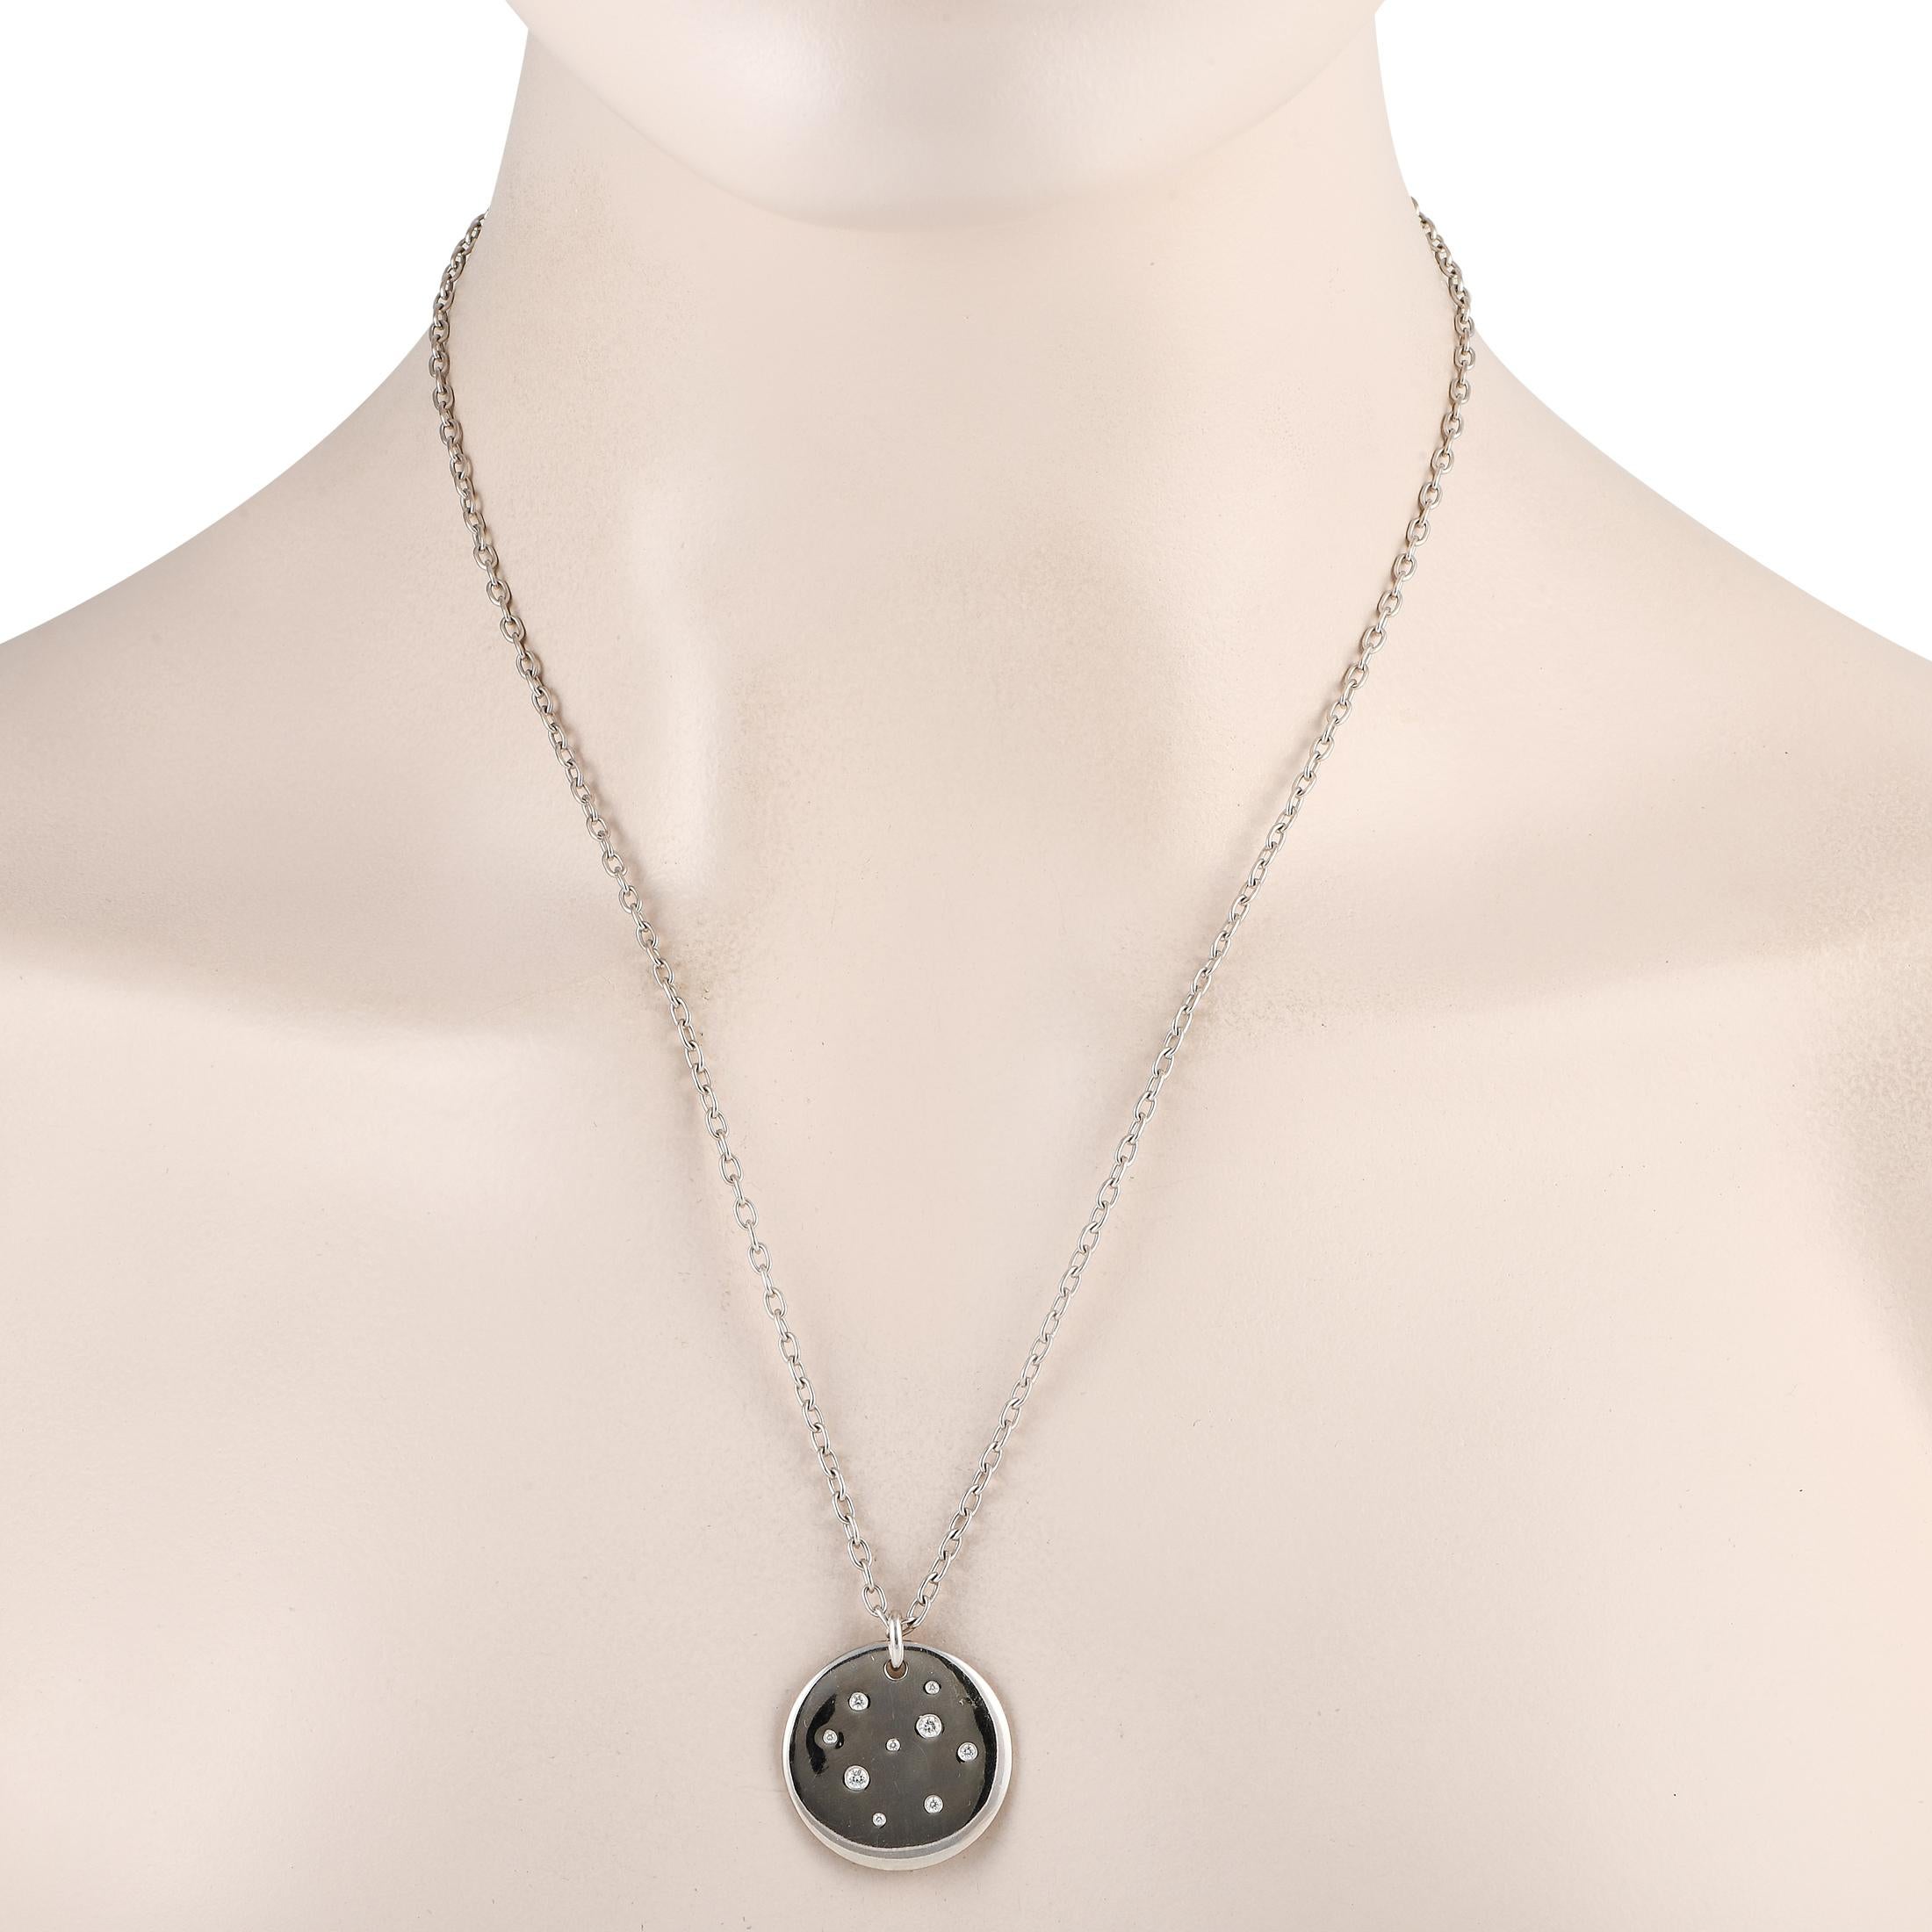 Inset diamonds with a total weight of 0.20 carats make add sparkle to this simple, elegant Tiffany & Co. necklace. Suspended from a 24” chain, you’ll find a circular 18K White Gold pendant measuring 1.0” round. 
 
 This jewelry piece is offered in